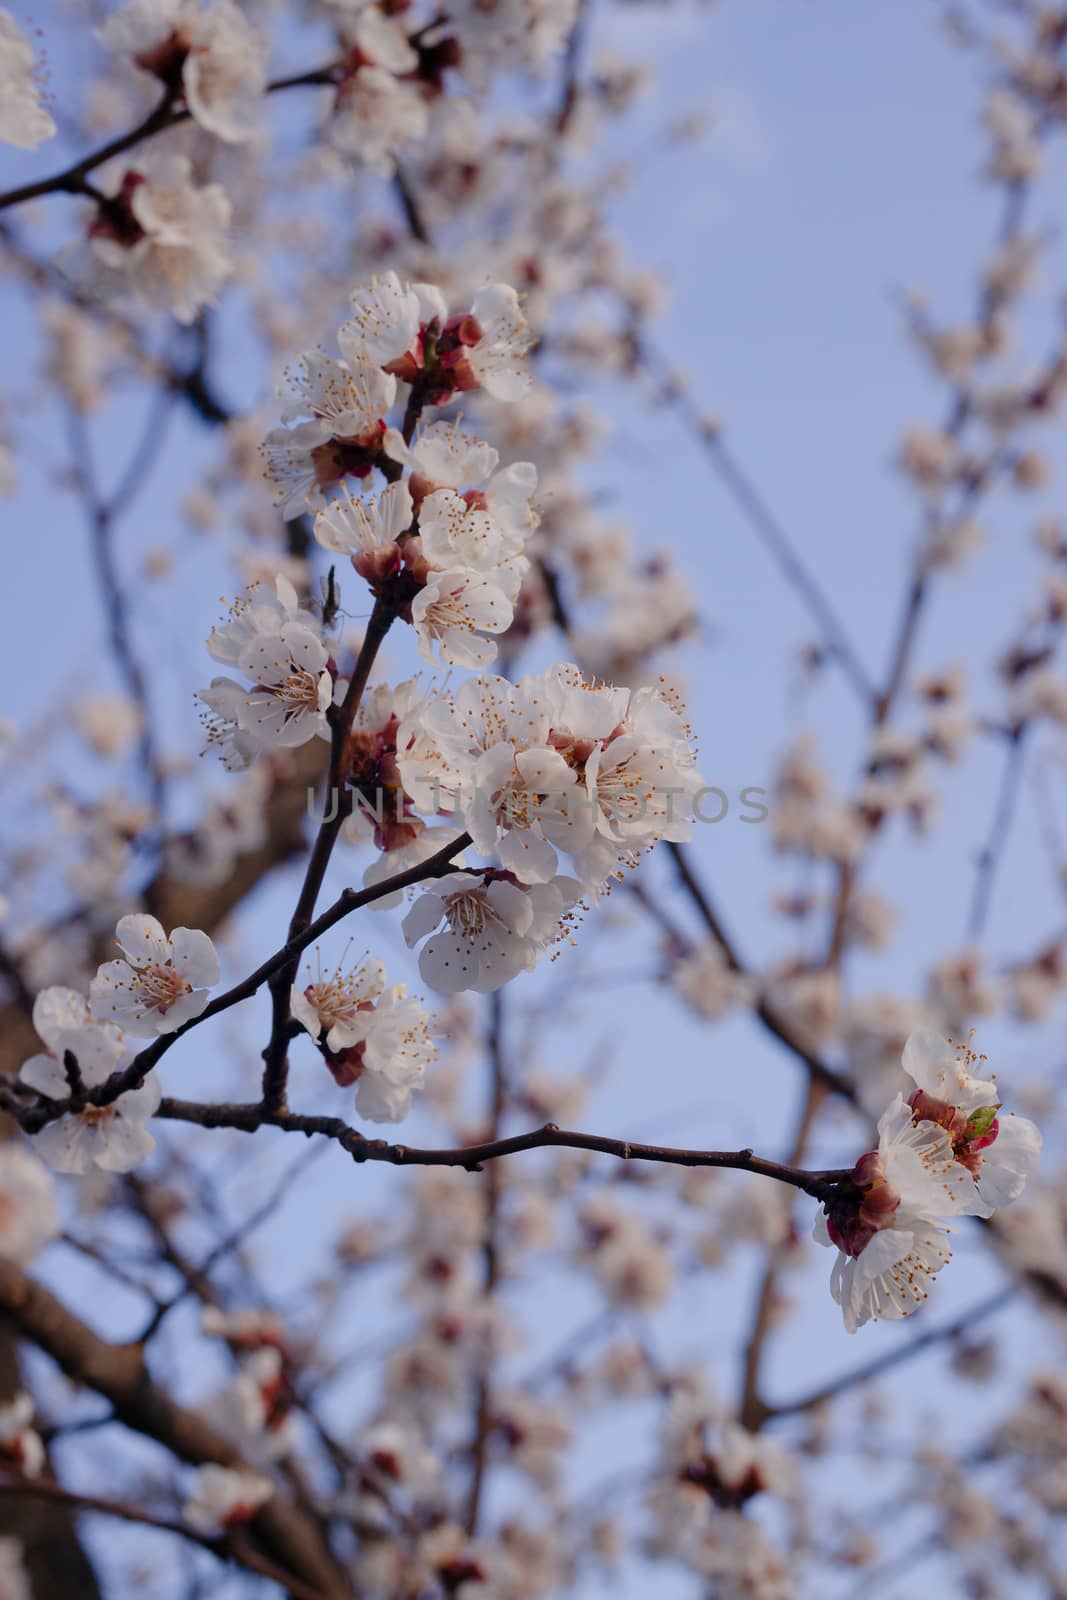 Apricot flowers on blurred blue sky background. Sprind day